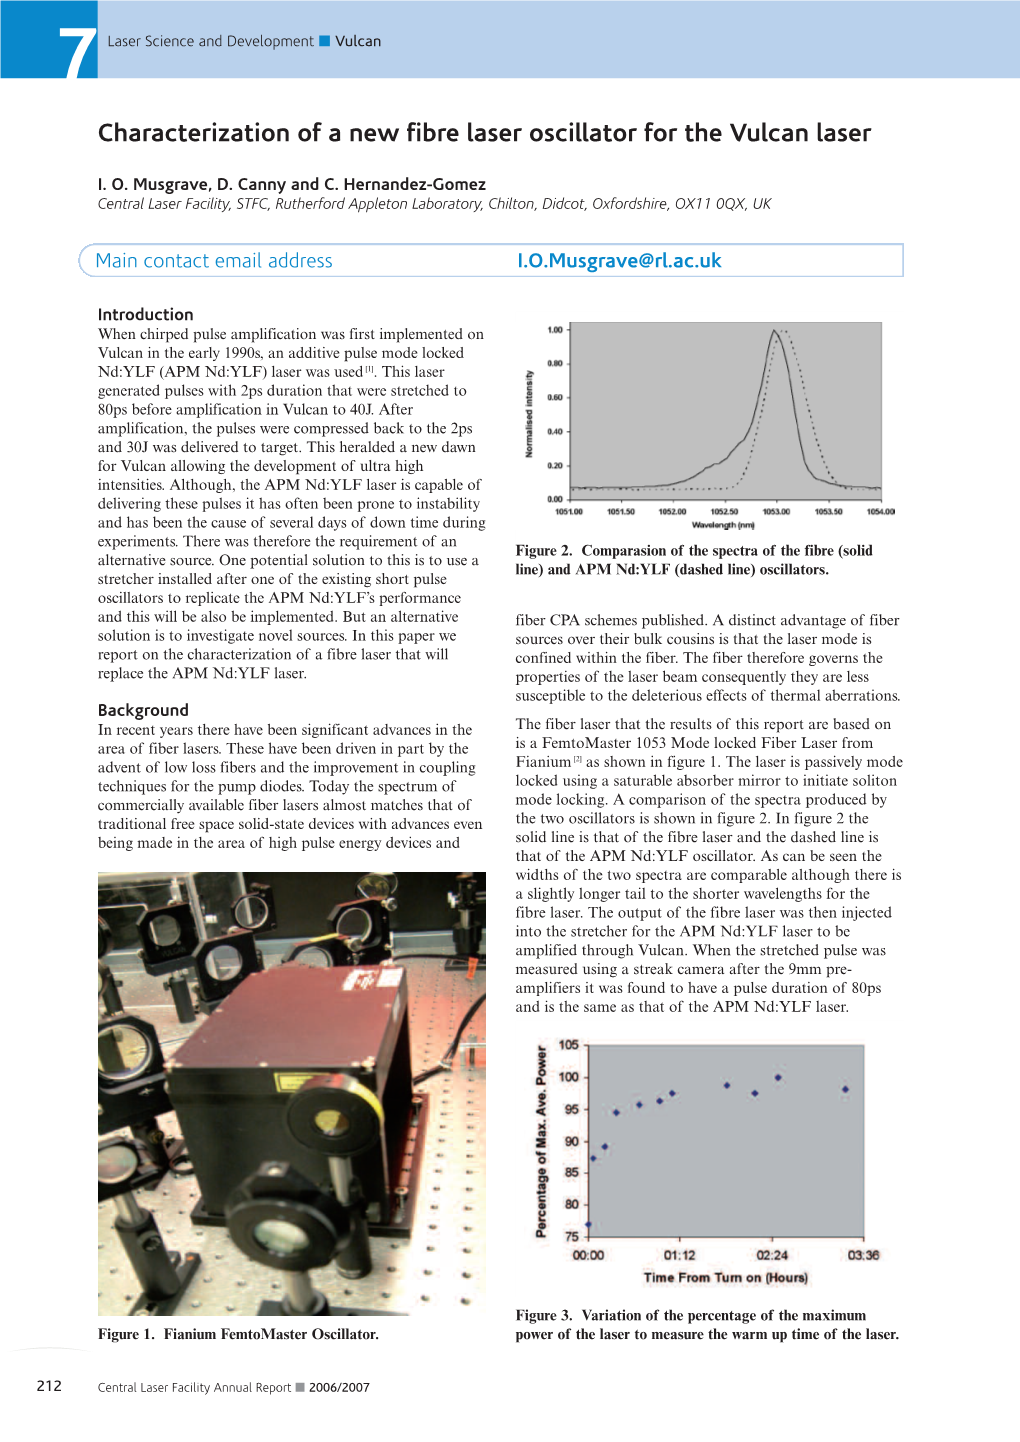 Characterization of a New Fibre Laser Oscillator for the Vulcan Laser